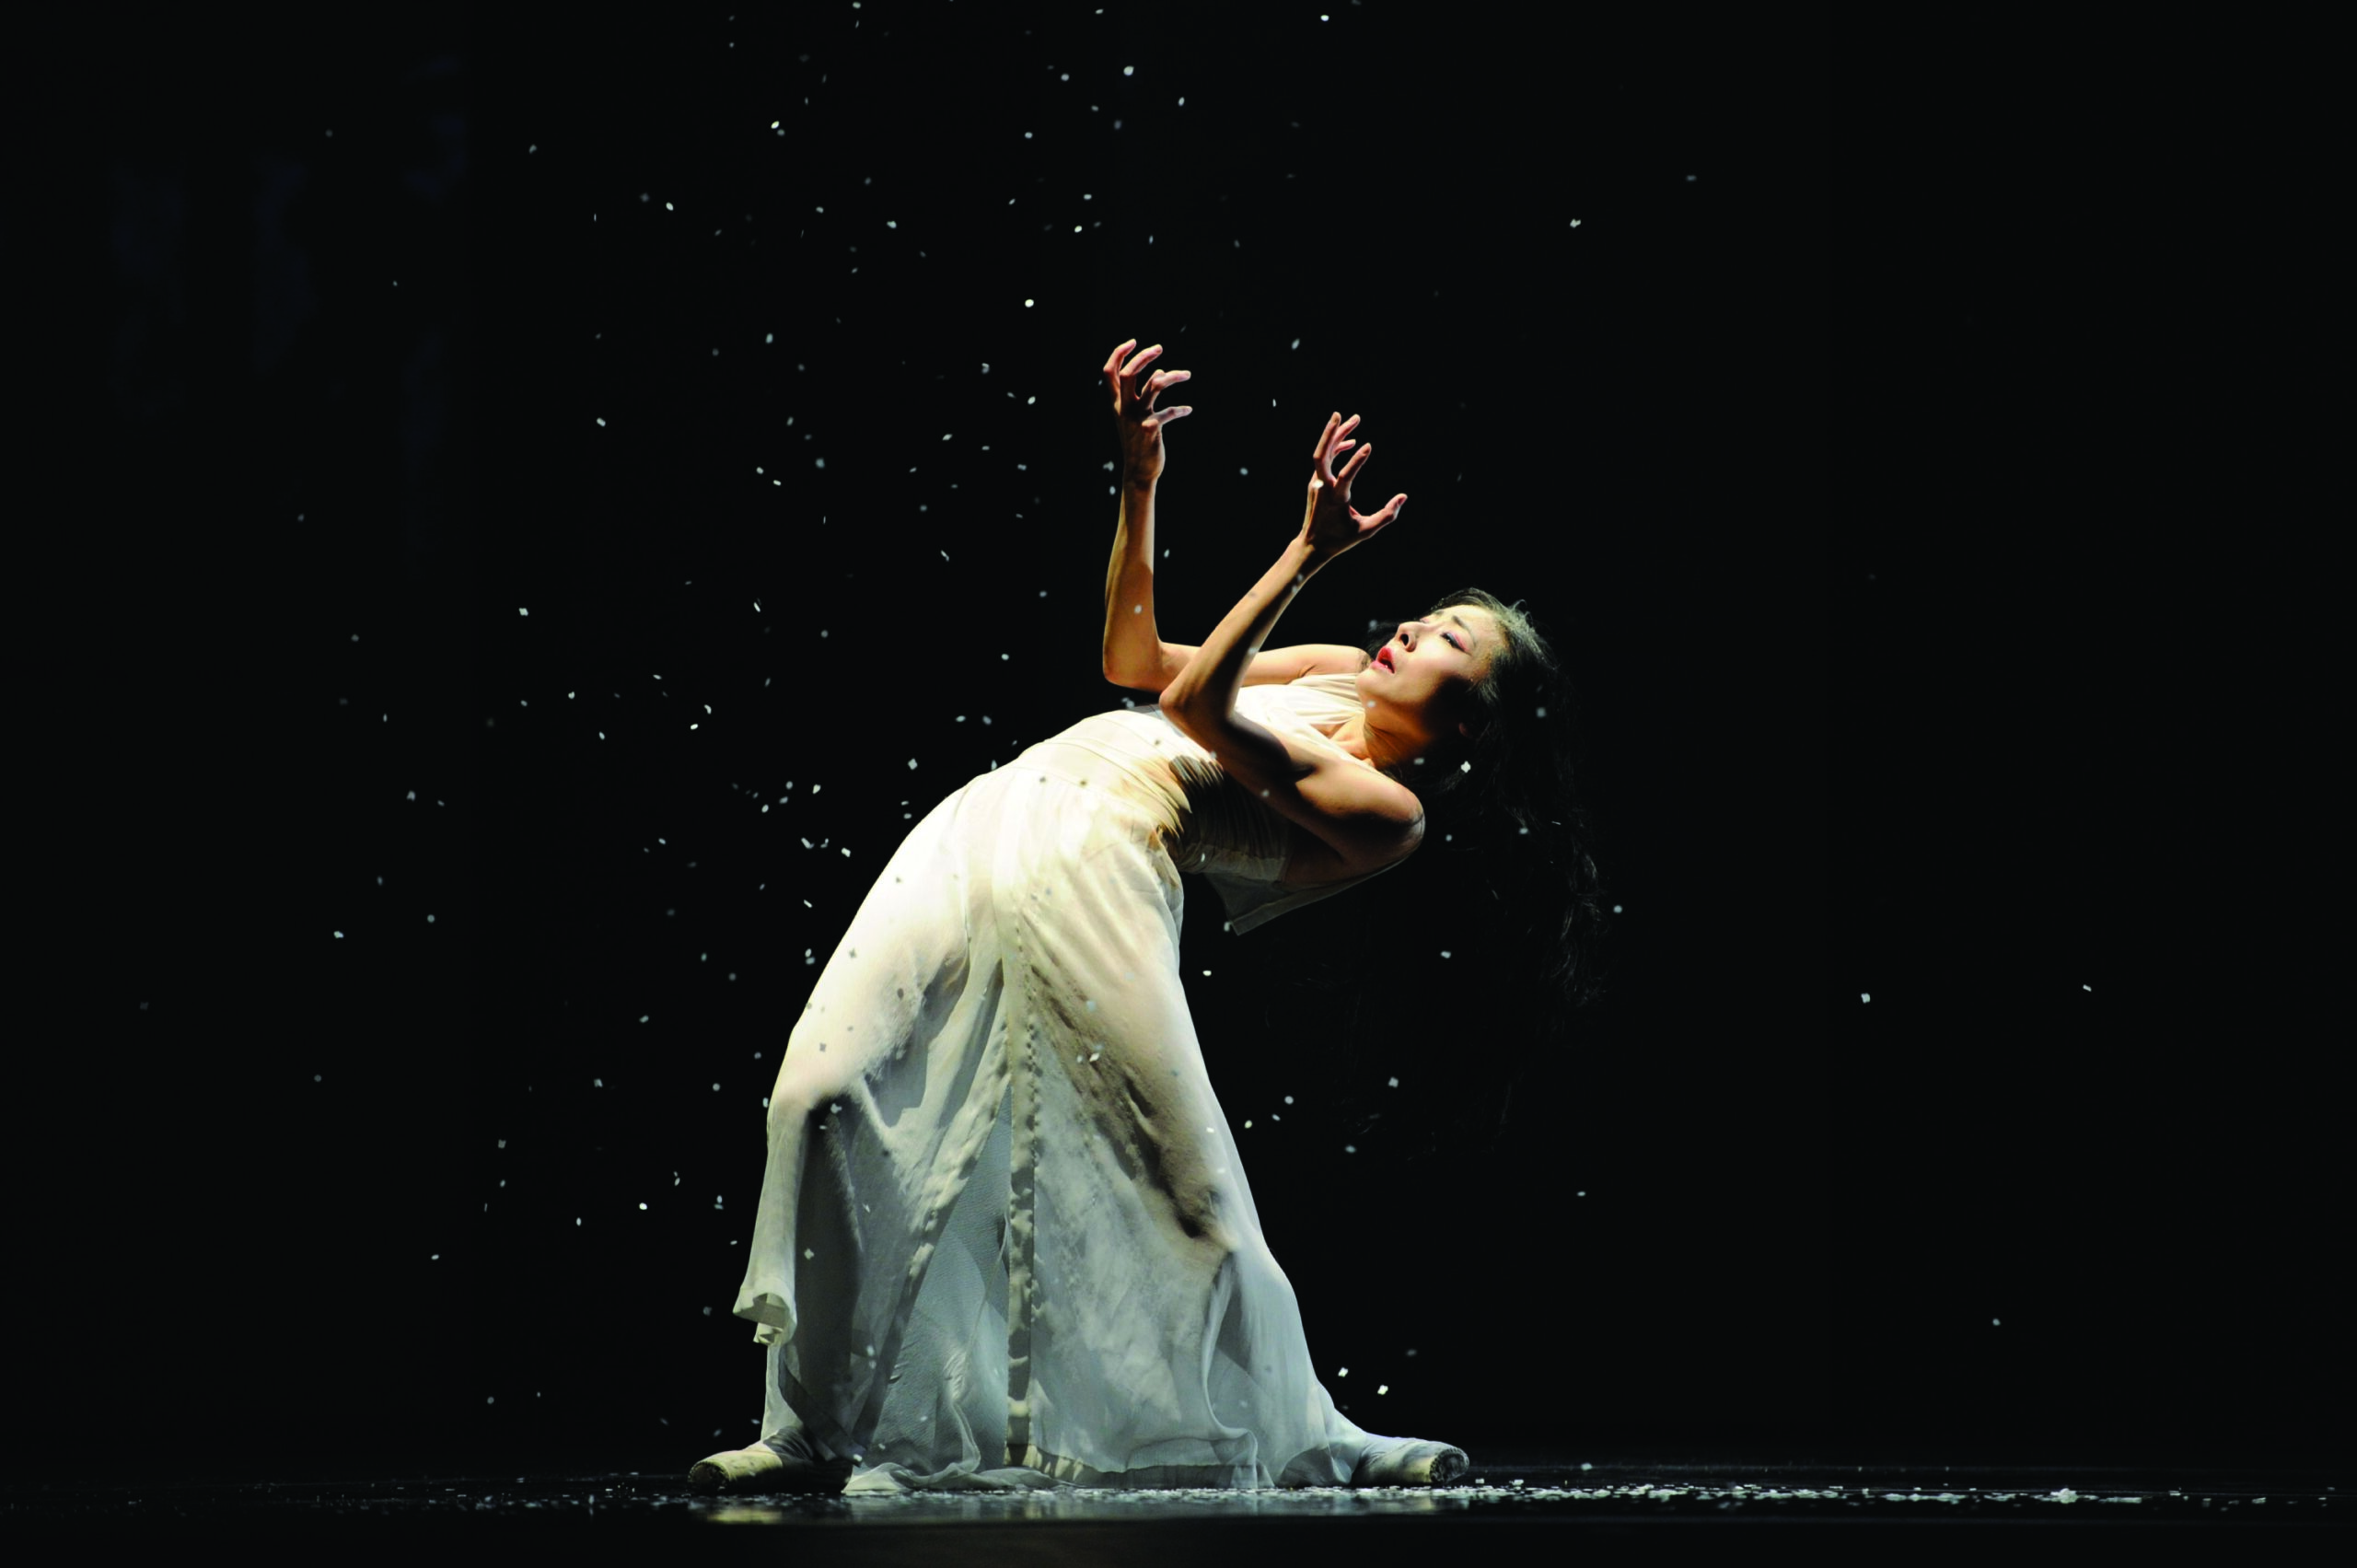 Yuan Yuan Tan stands flat footed, arching back so her spine is nearly level with the ground as she stares at her upraised hands, ash falling onto and around her. Her dark hair is loose and falls behind her; she wears a white dress that drapes to the dark stage and matching white pointe shoes.